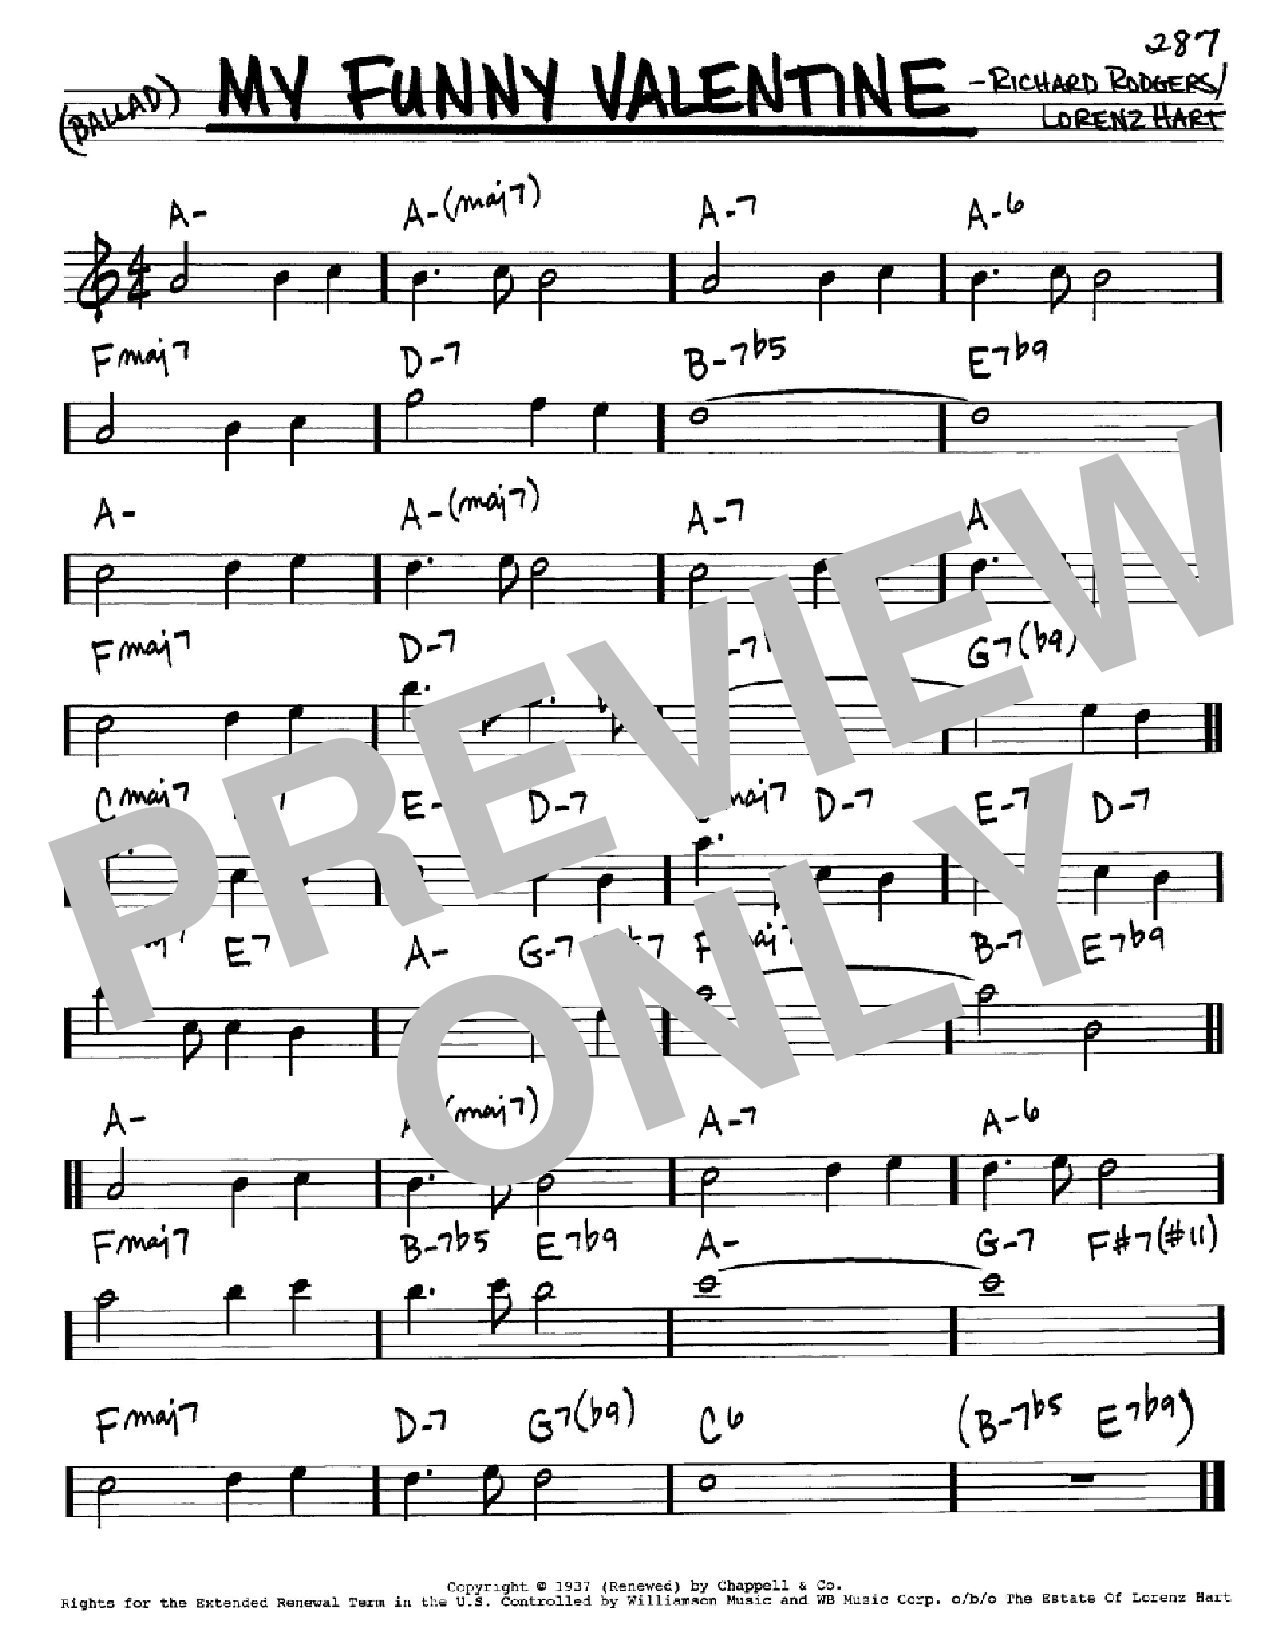 Download Rodgers & Hart My Funny Valentine Sheet Music